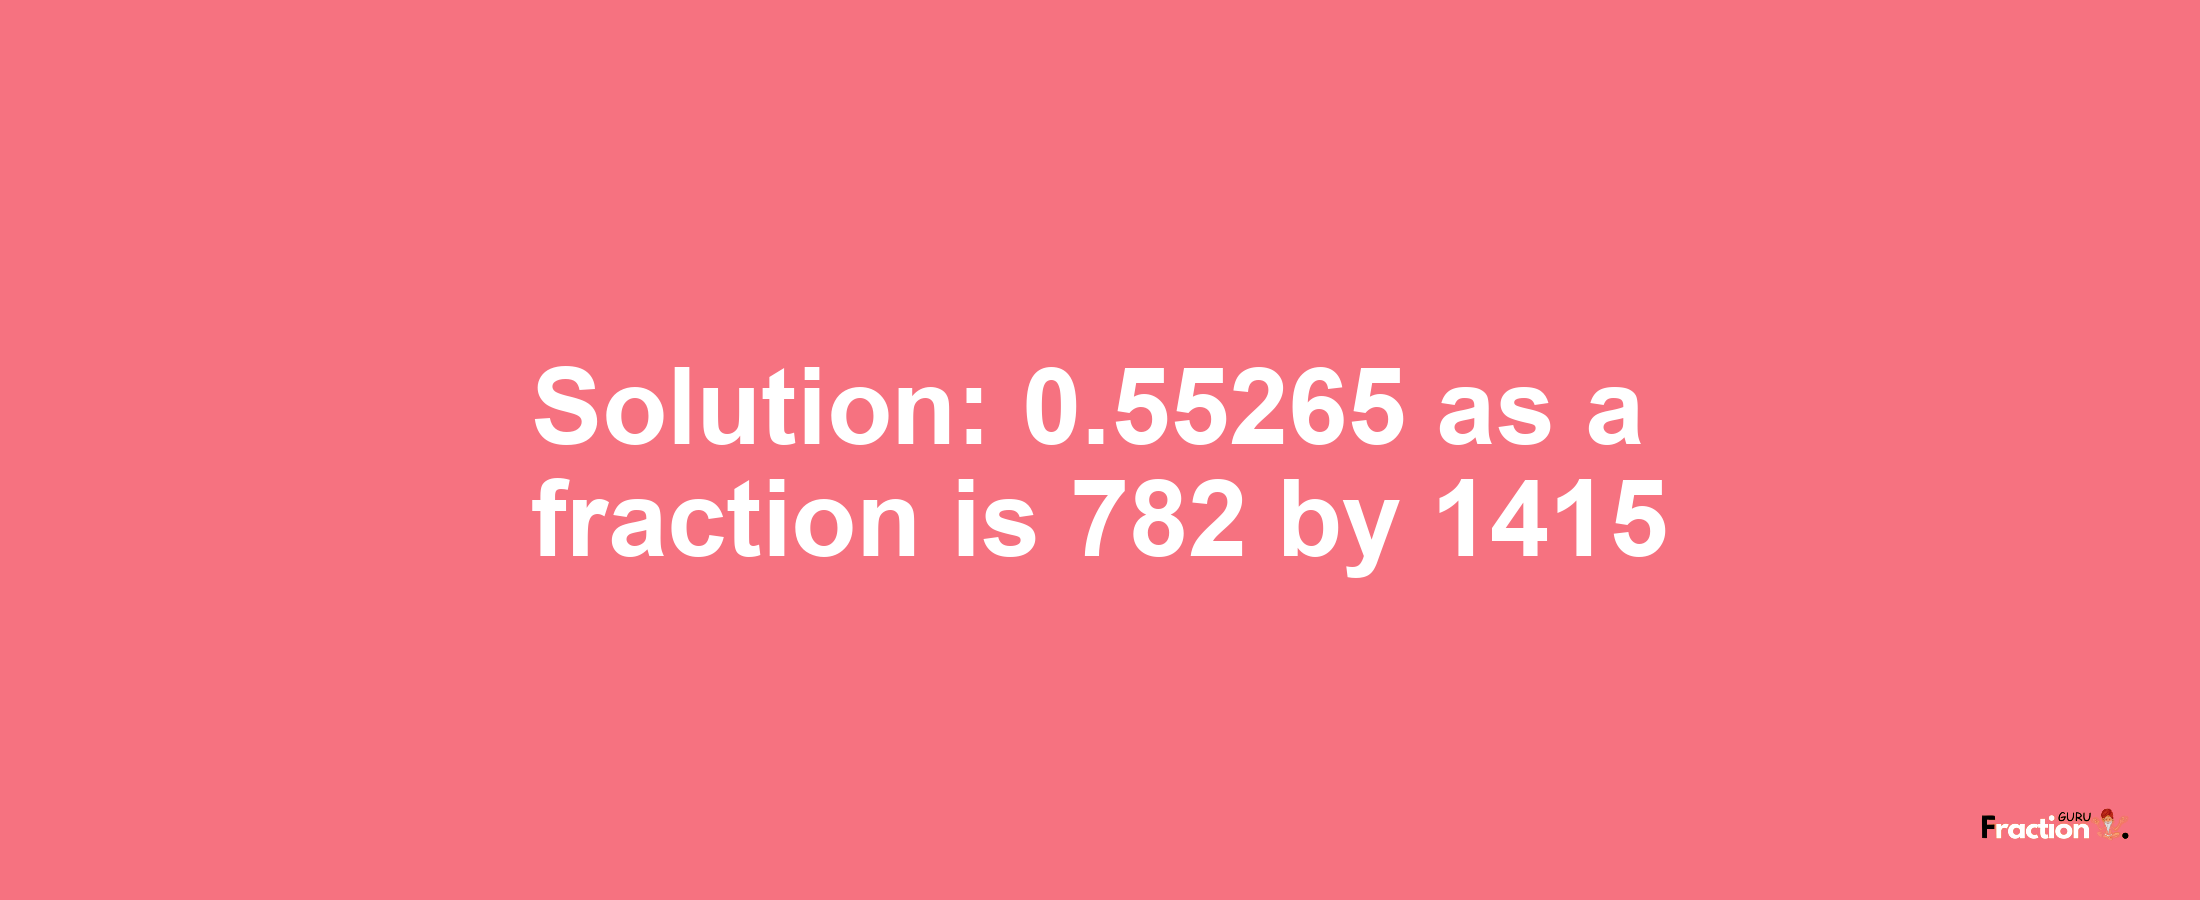 Solution:0.55265 as a fraction is 782/1415